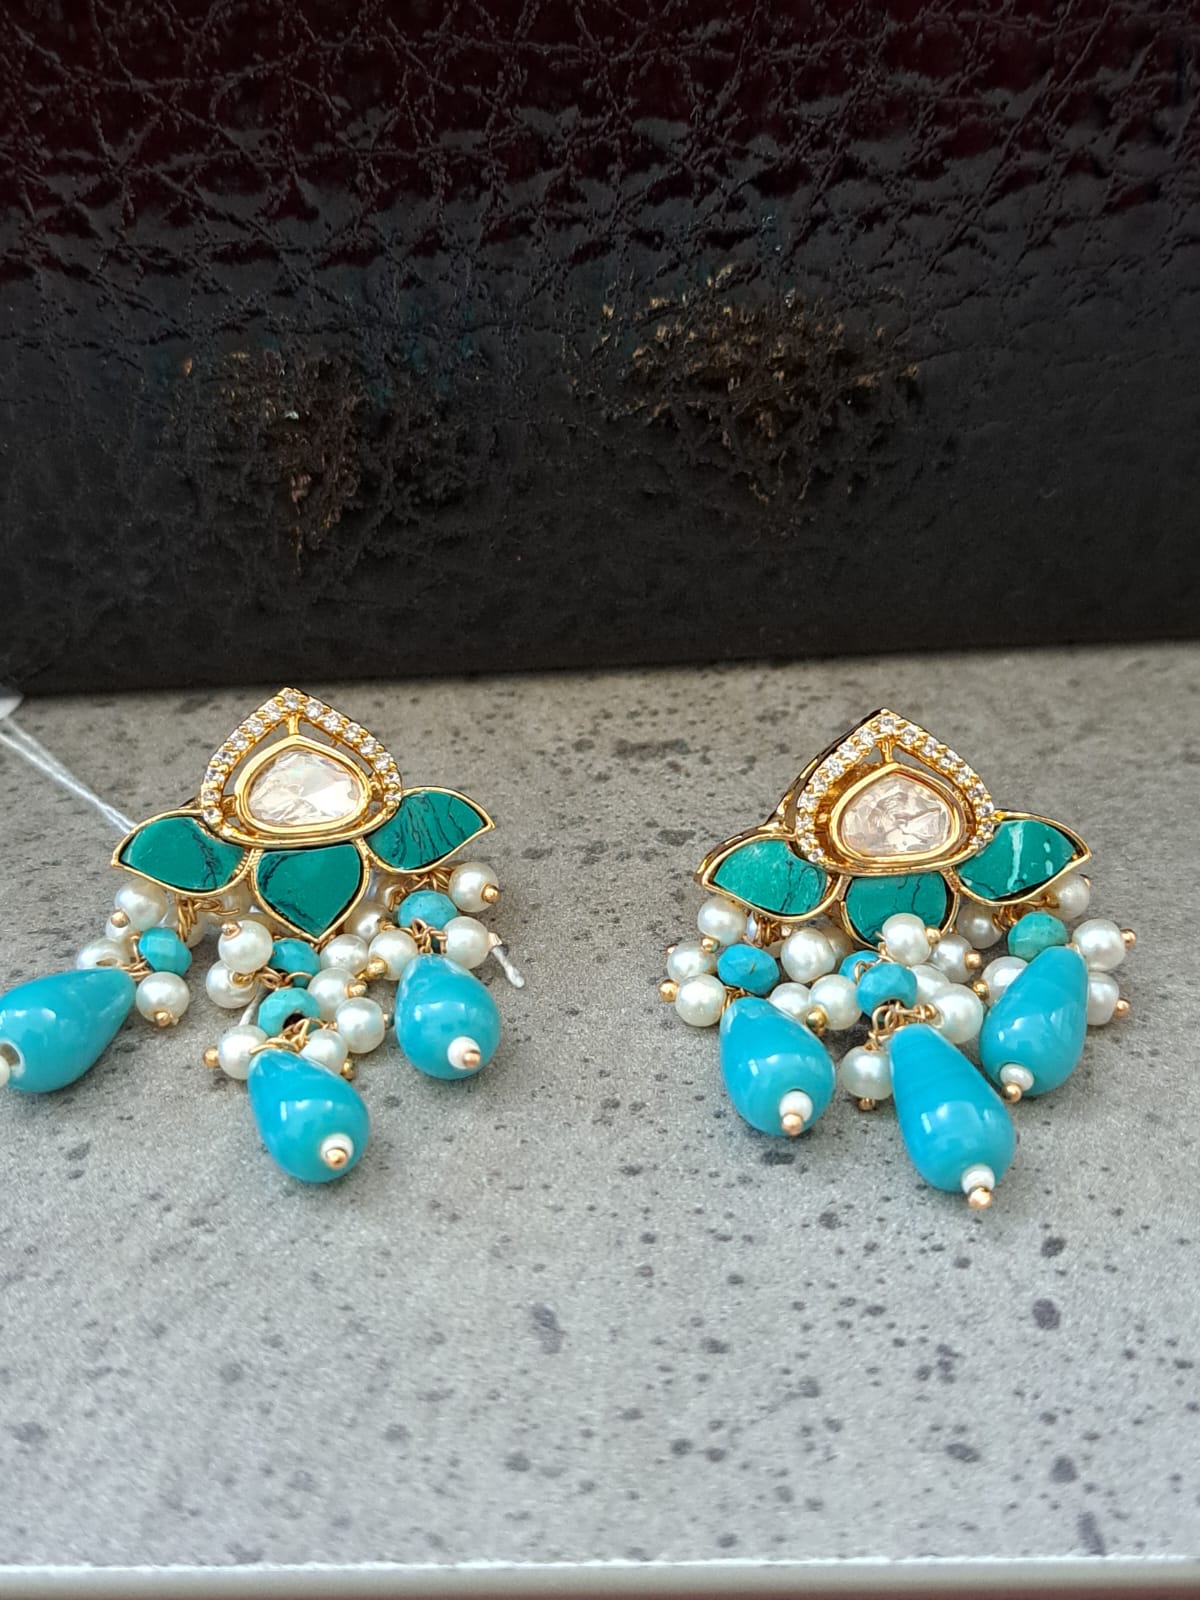 Kundan studs with turquoise marble, beads and pearls.